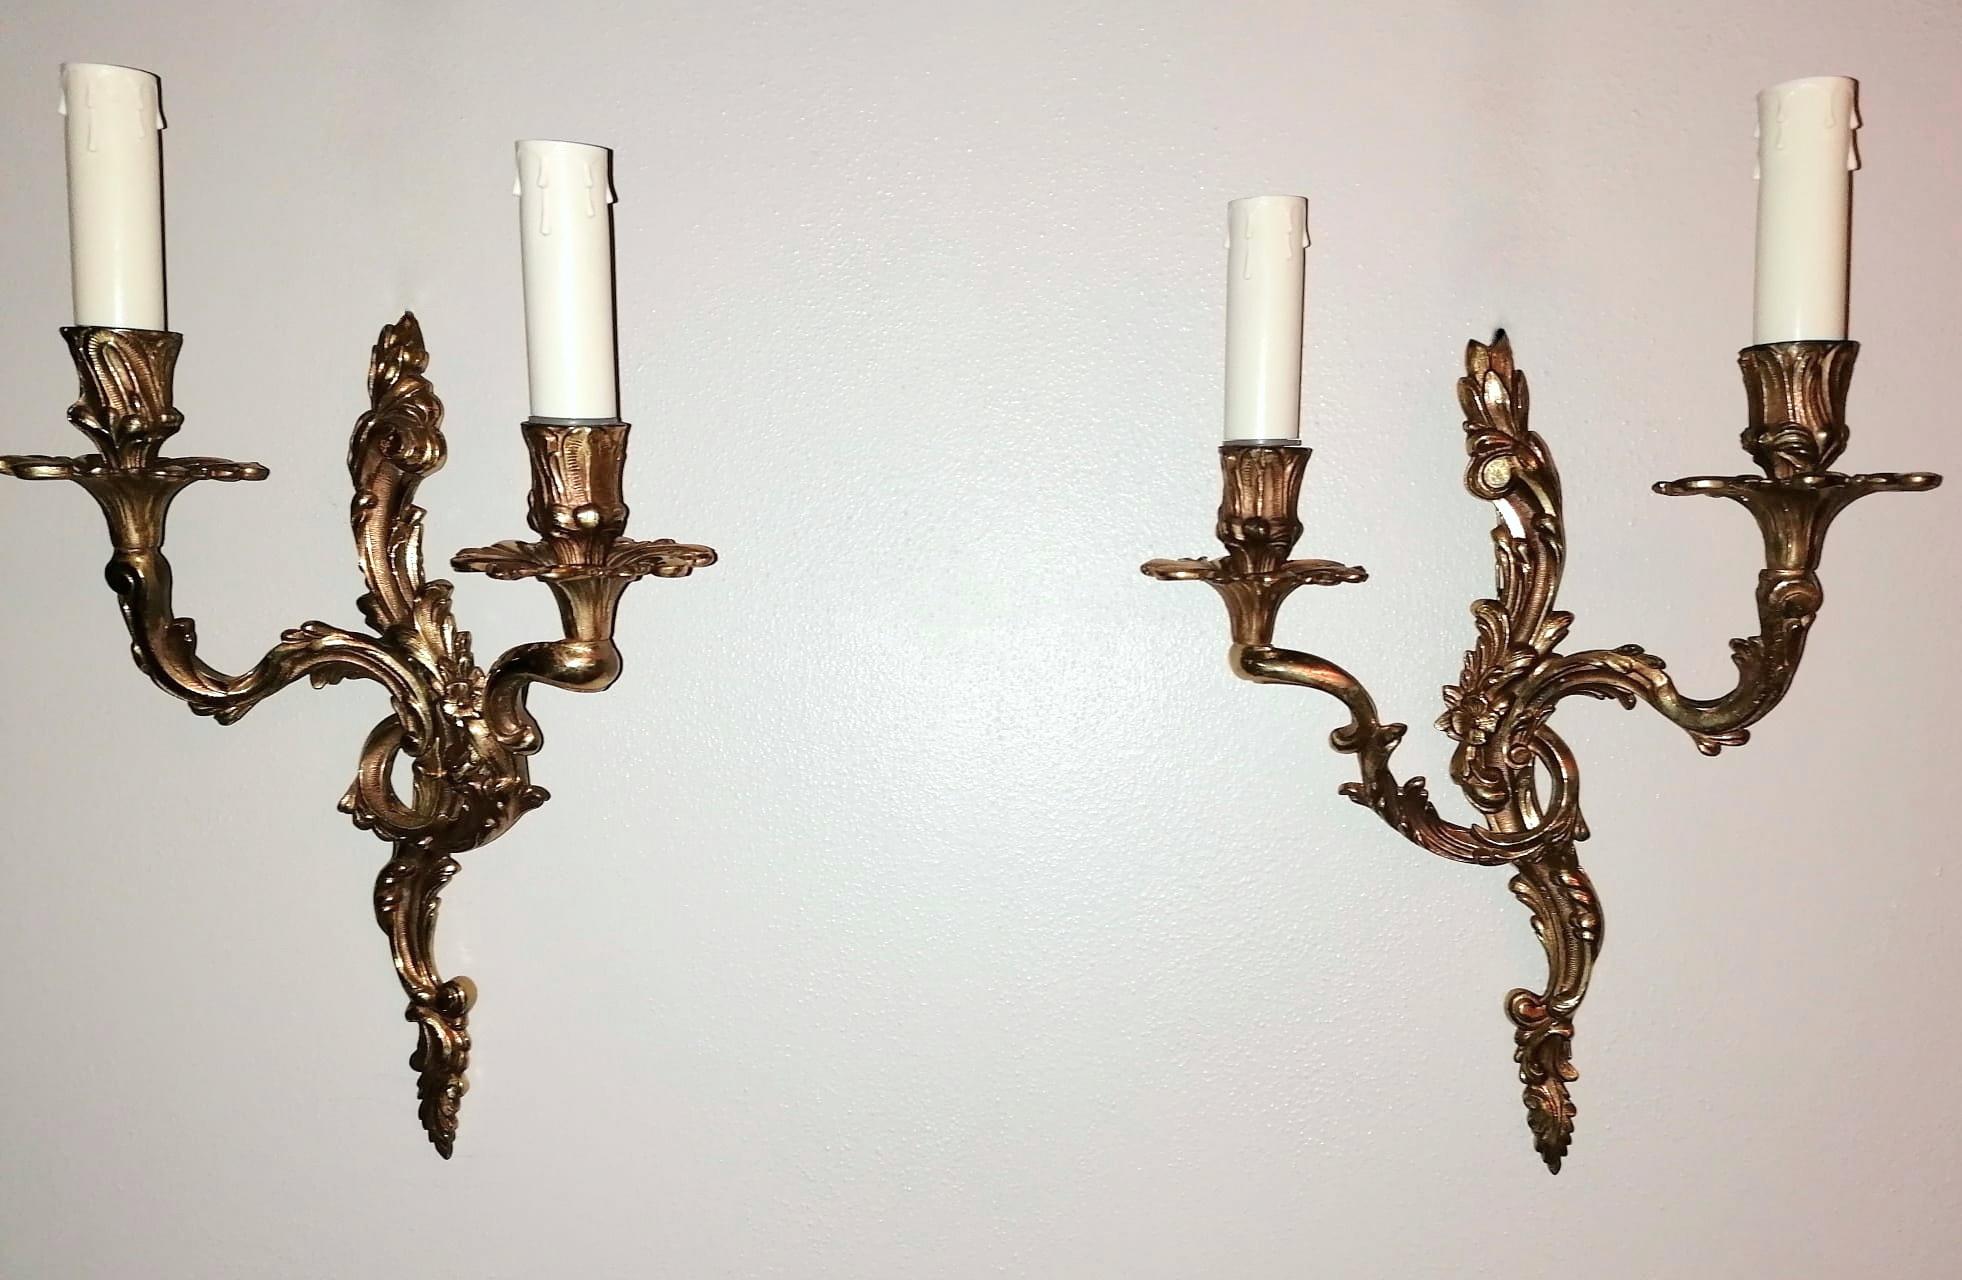 We kindly suggest you read the whole description, because with it we try to give you detailed technical and historical information to guarantee the authenticity of our objects.
Particular and original pair of wall lamps, made in Louis XVI style